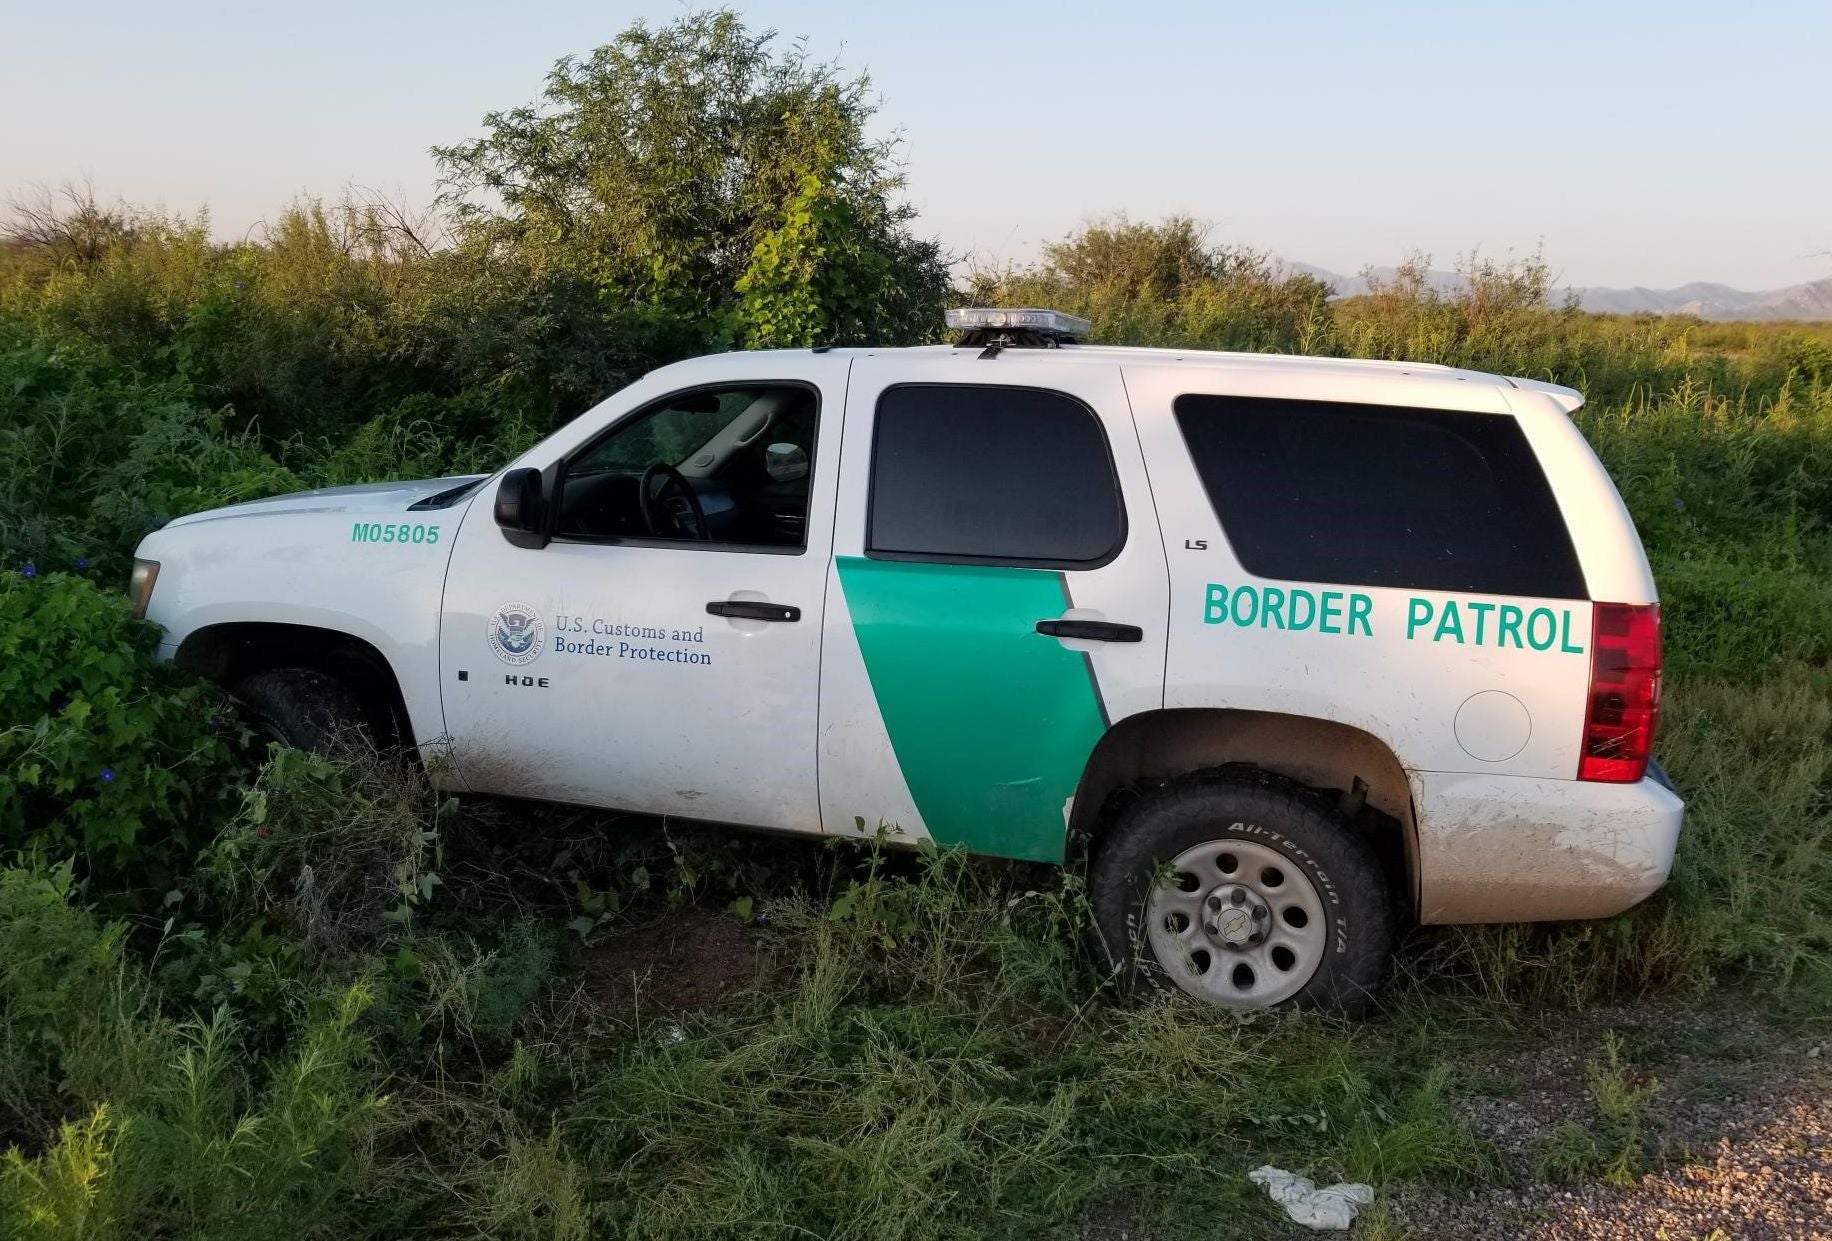 The interim Chief Patrol Agent shared an image of the car used by the man who drove 10 migrants in